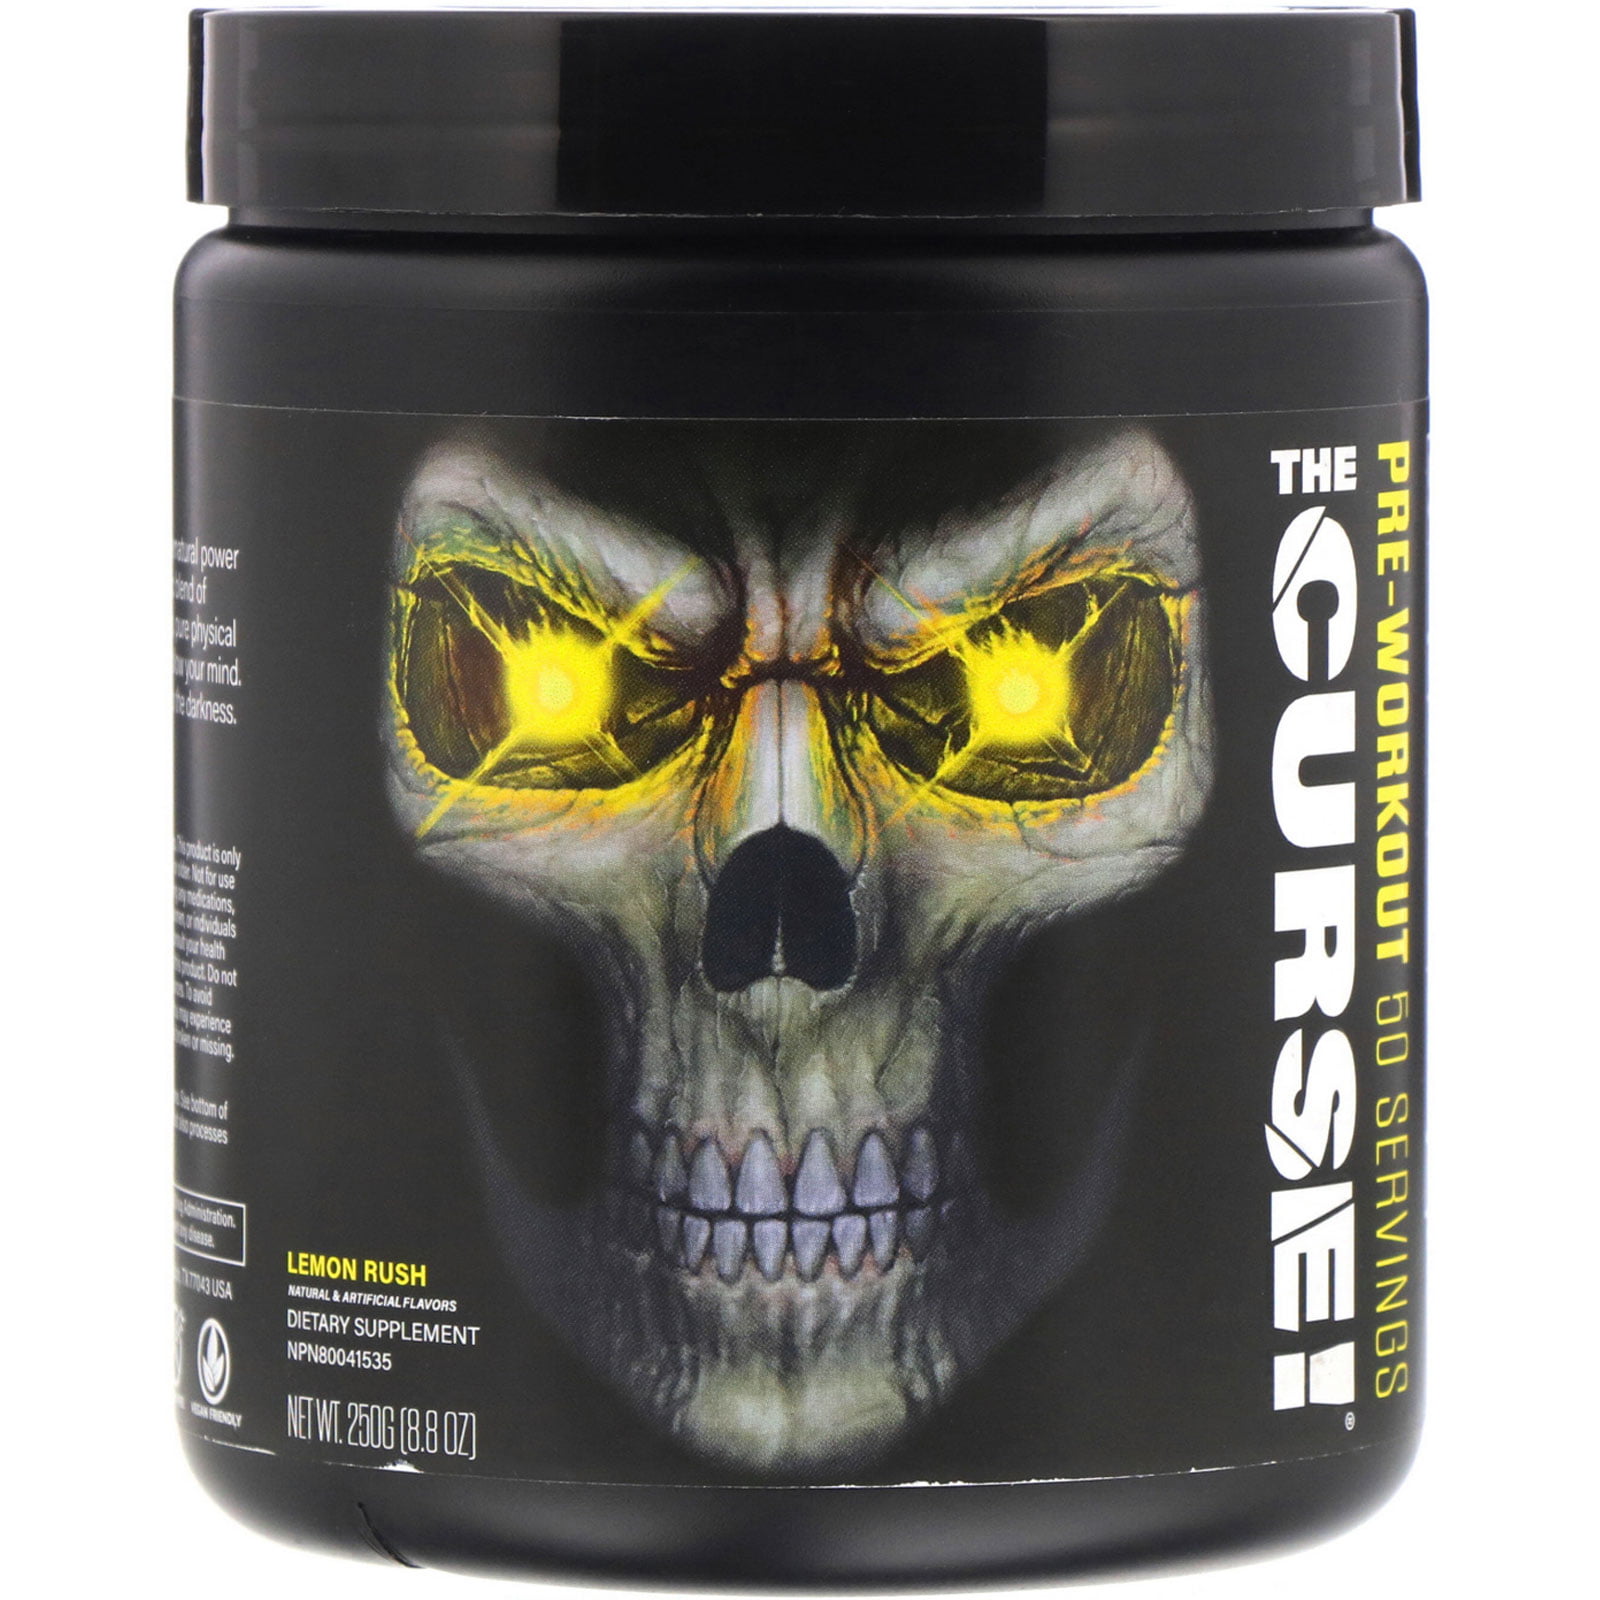  Frenzy Pre Workout Buy for Beginner